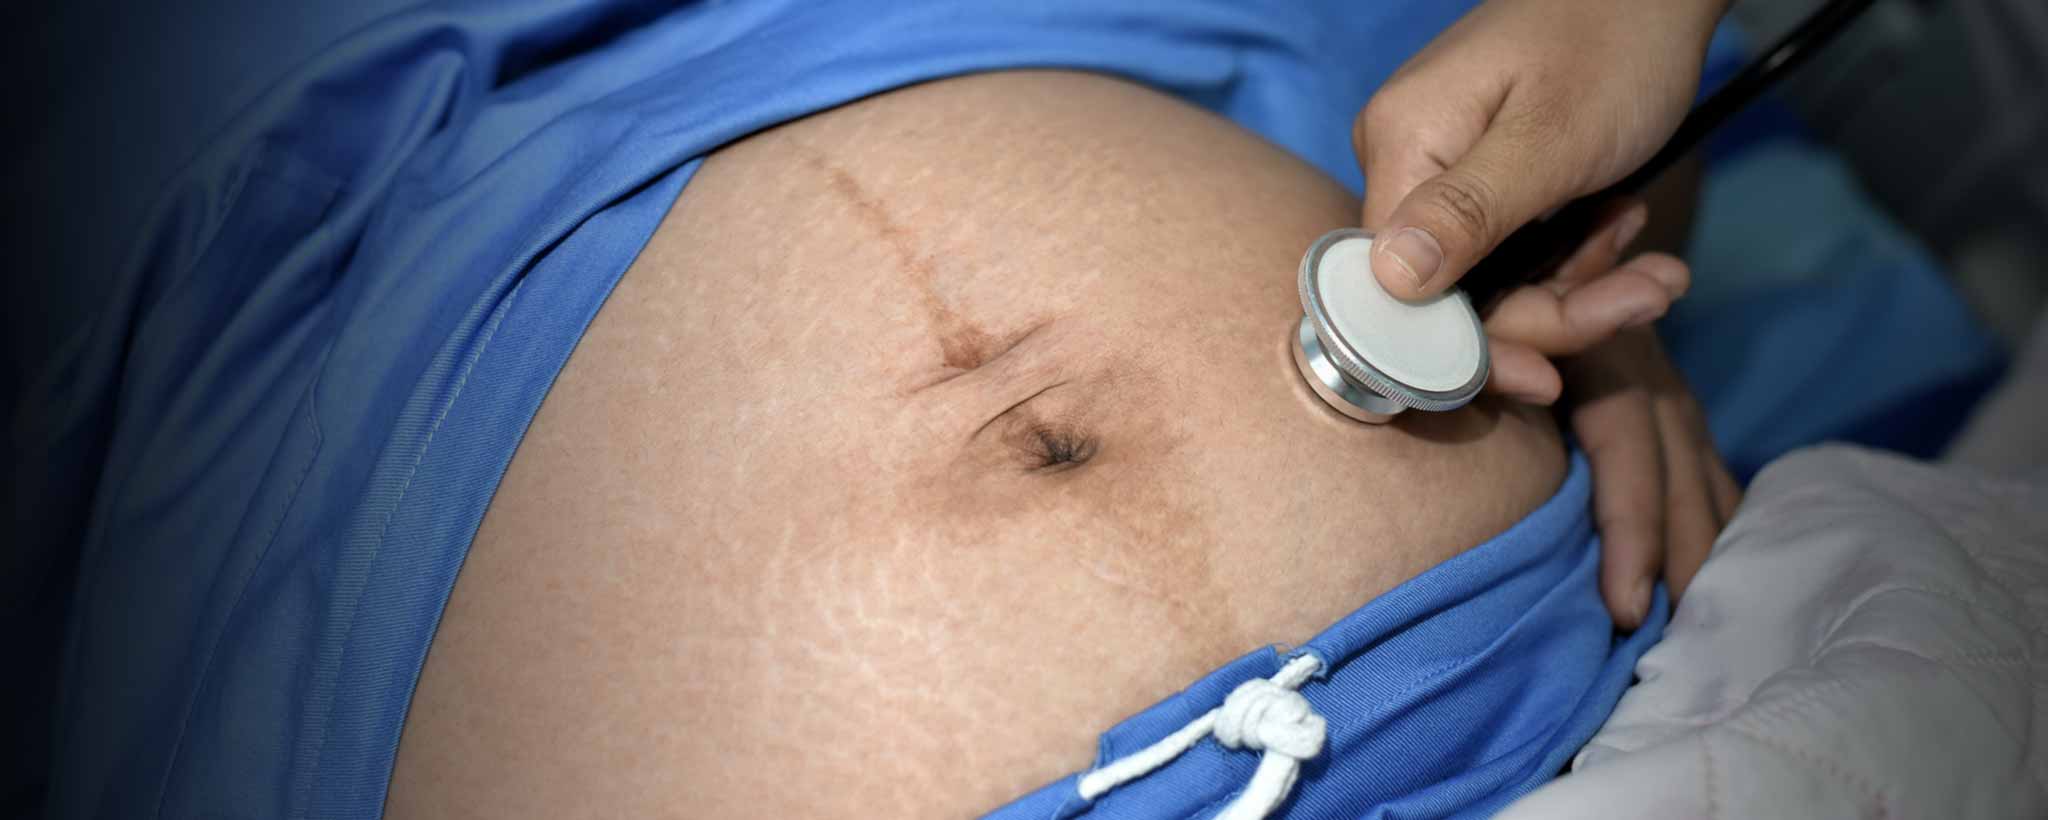 'Why Cesarean Birth Rates Are So High'